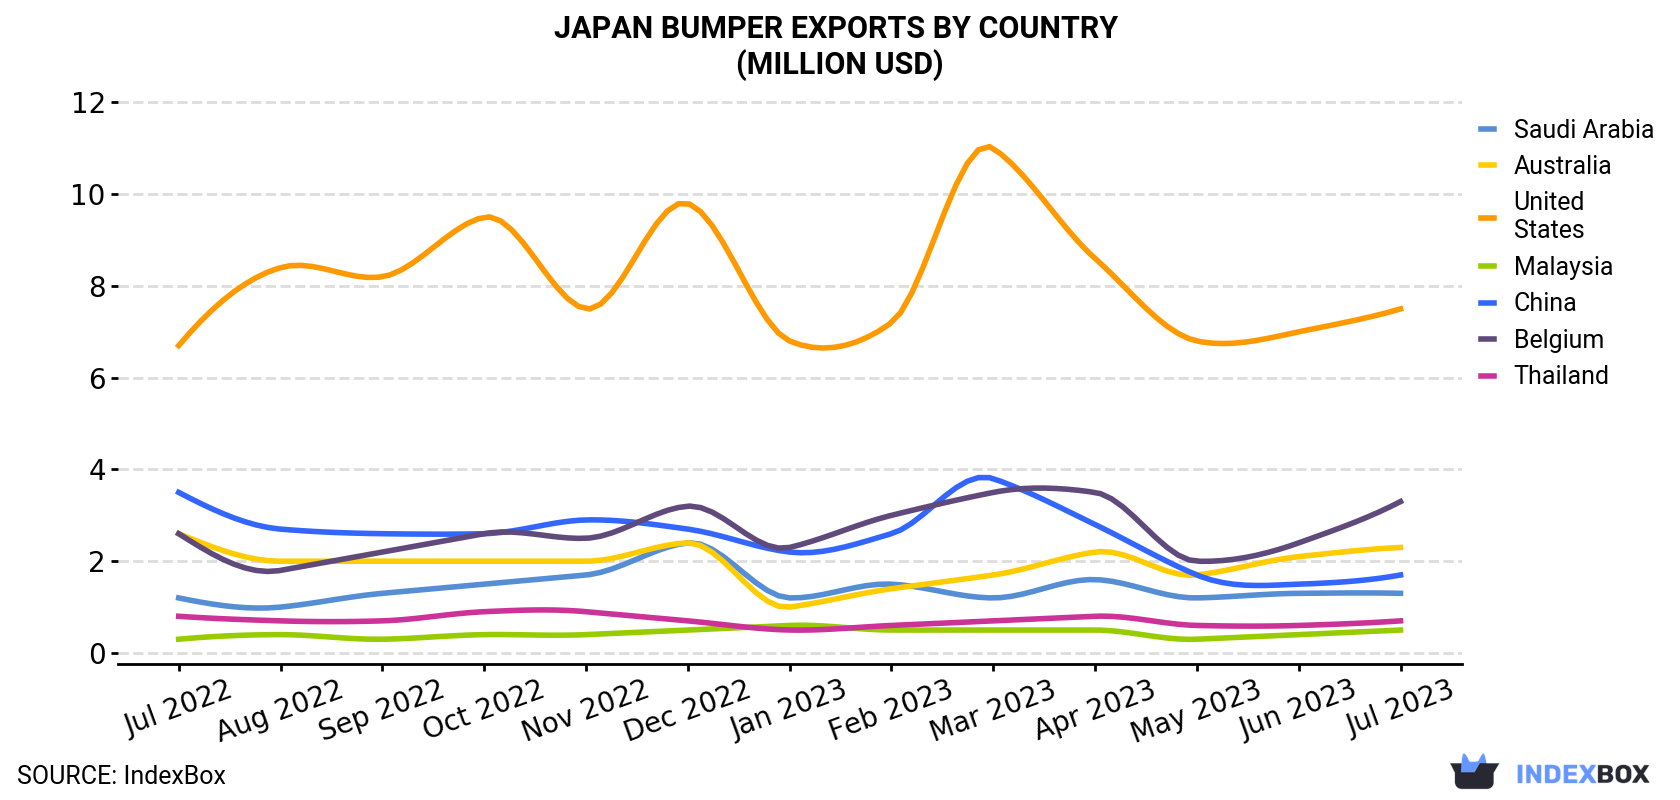 Japan Bumper Exports By Country (Million USD)